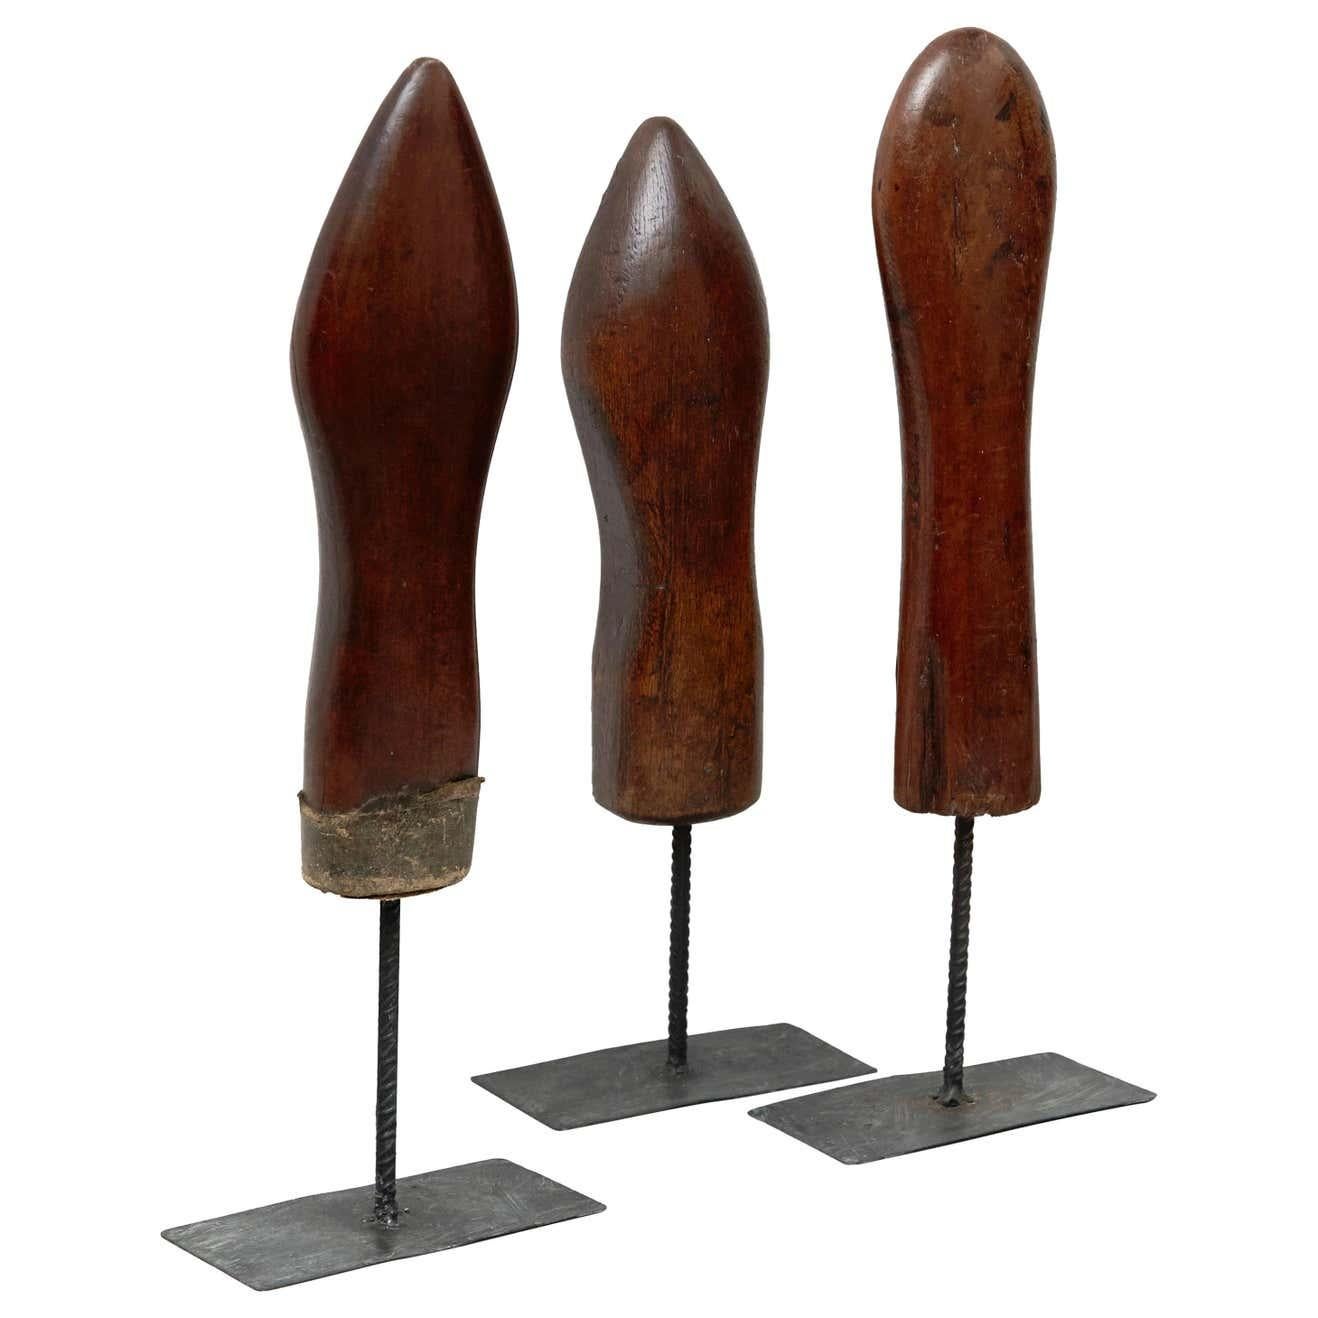 Set of 3 Mid-Century Modern Wood and Metal Sculptures, circa 1950 For Sale 6